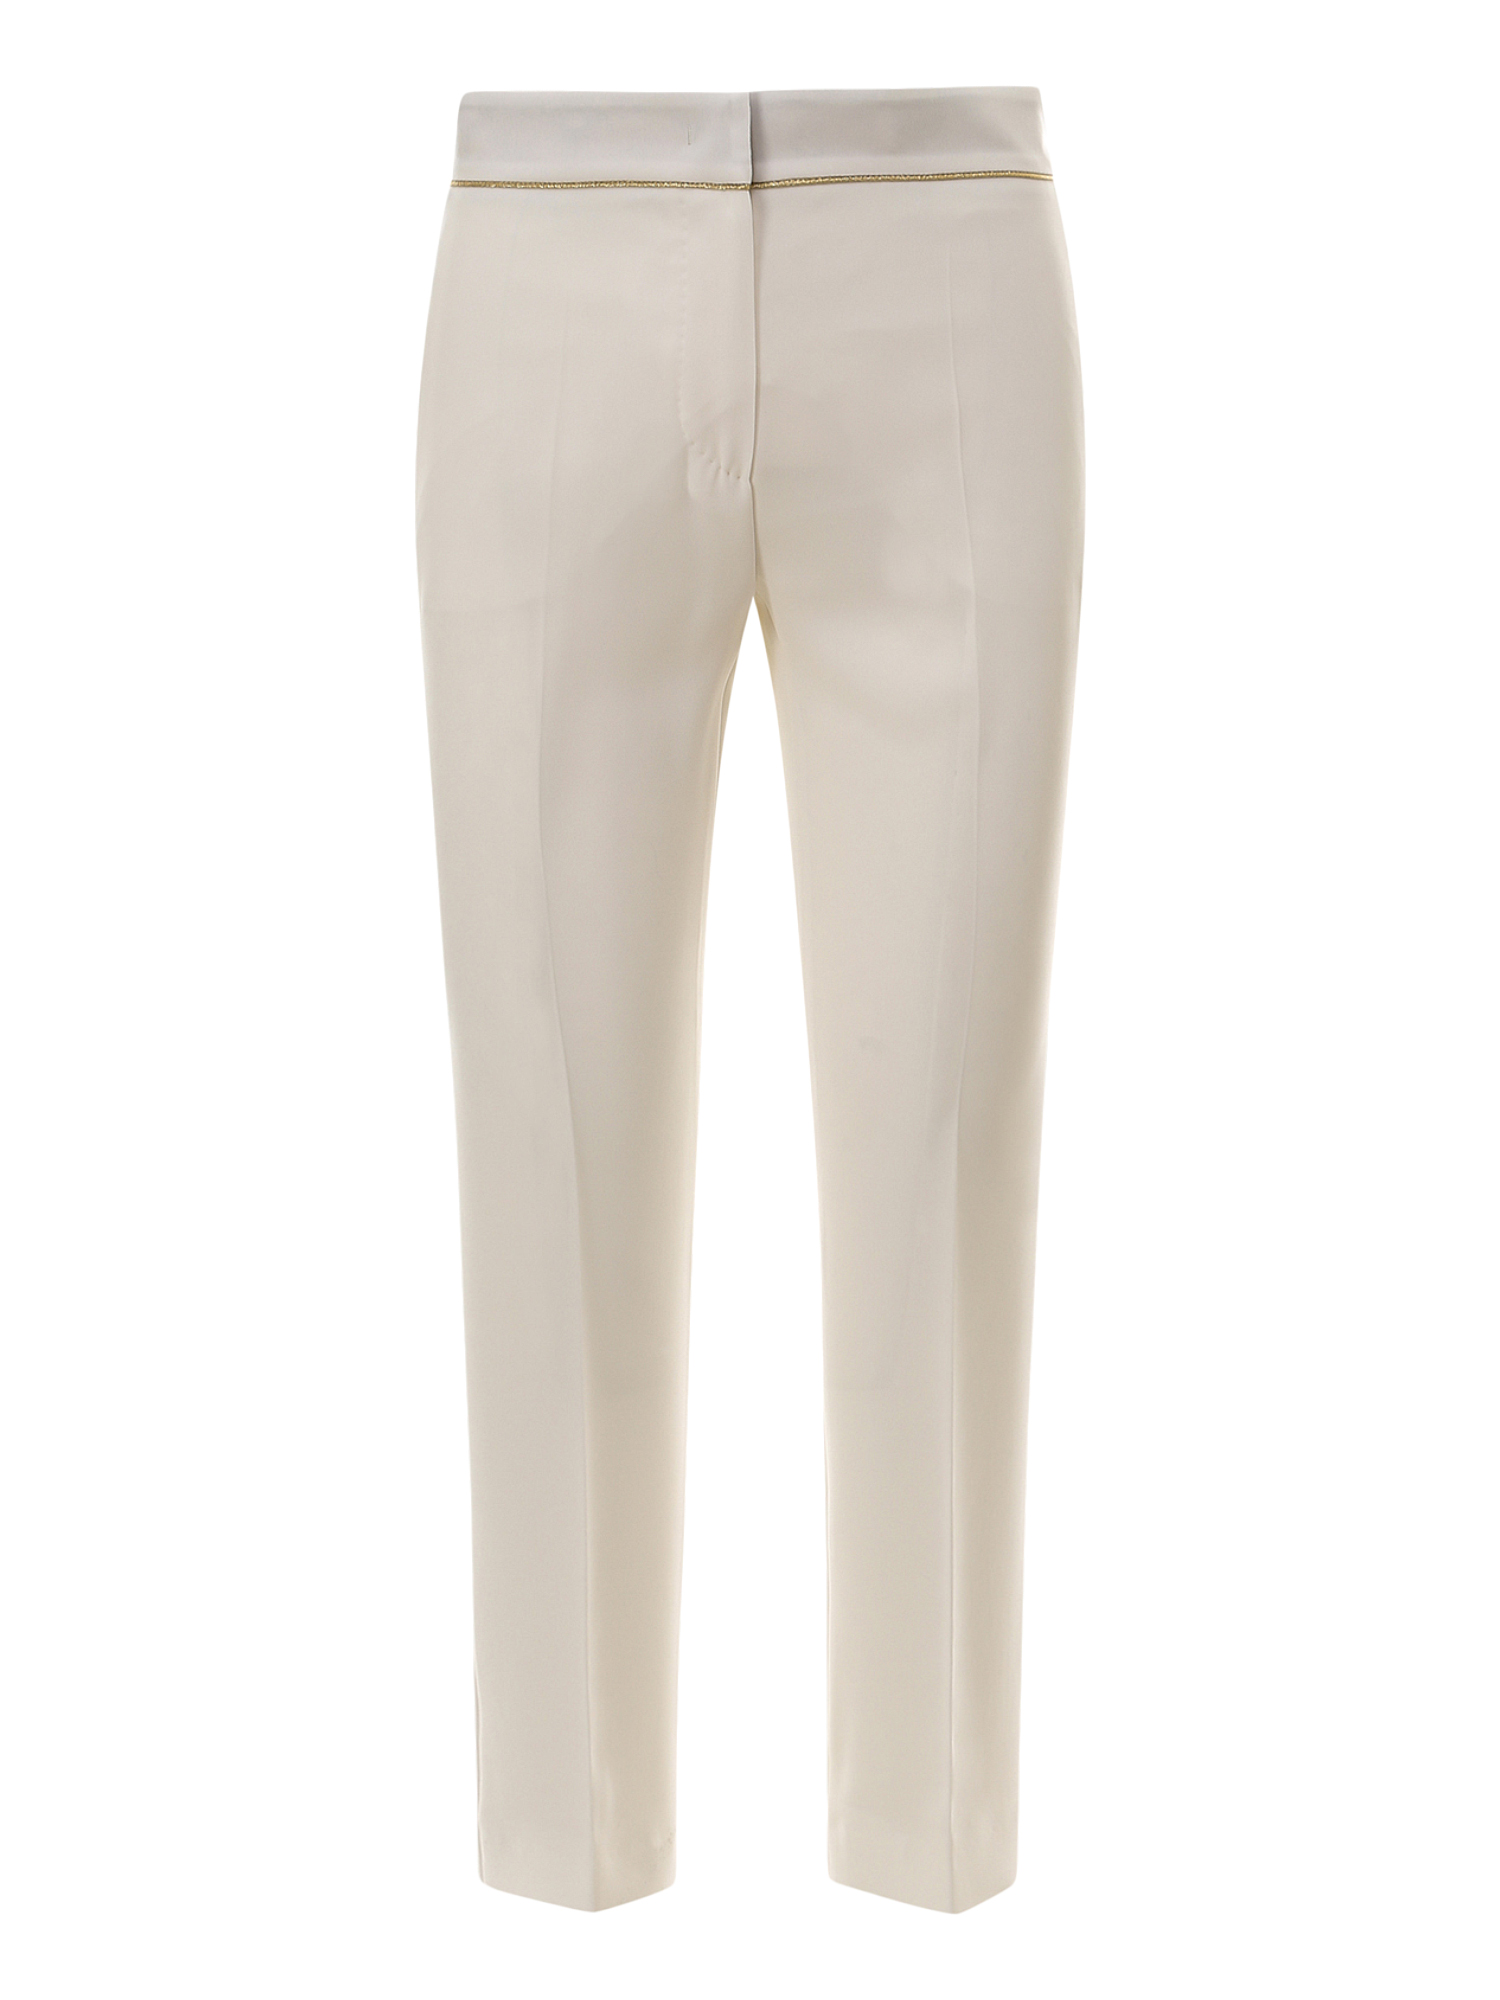 Trouser with lurex detail